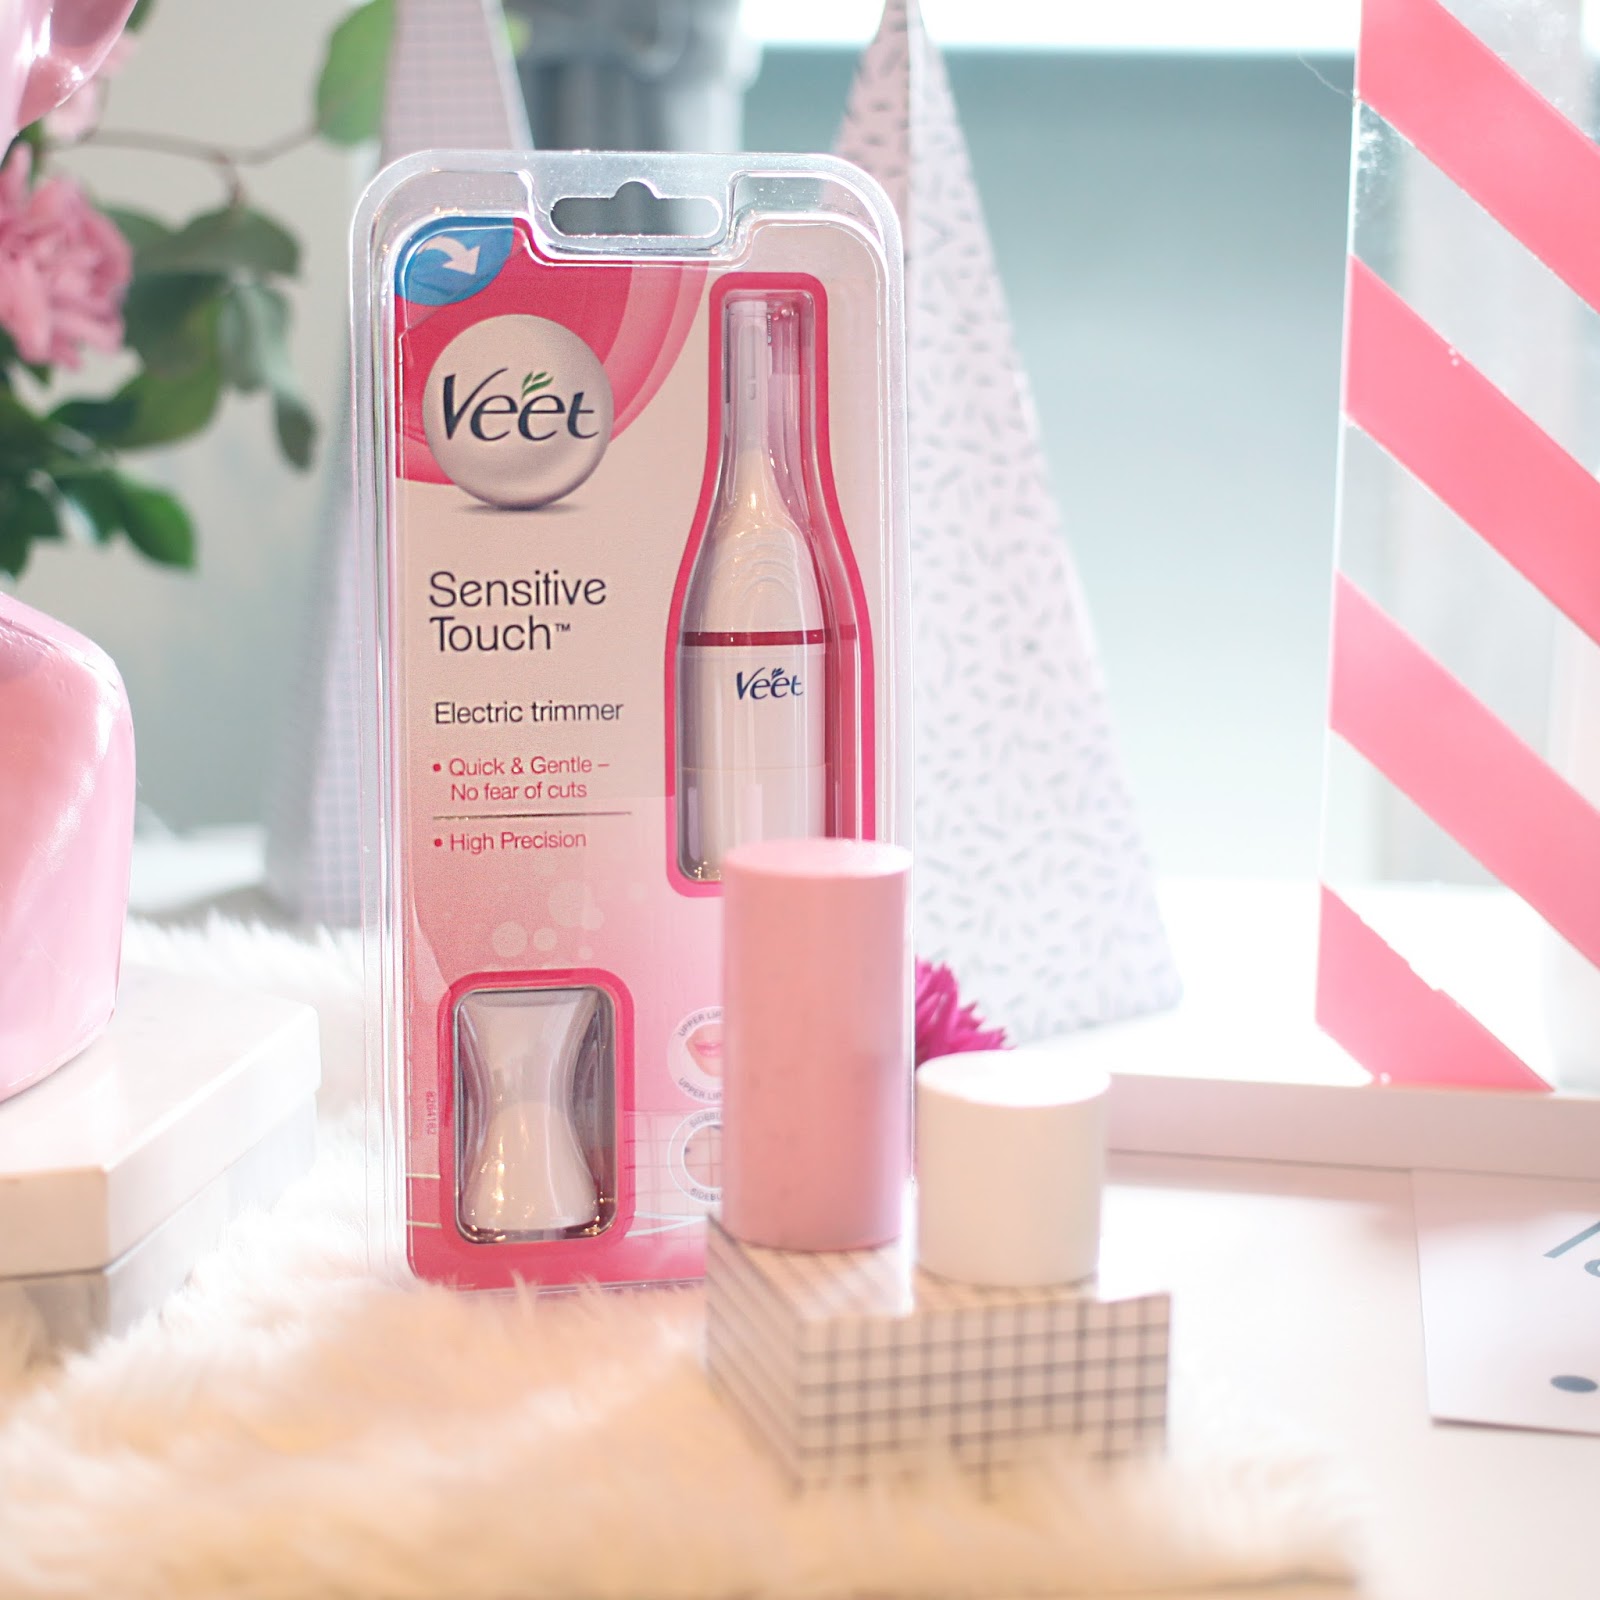 Lily Zhen - One Thing a Time and Conquer the World: [REVIEW] Trimmer Trimmer | VEET Sensitive Touch